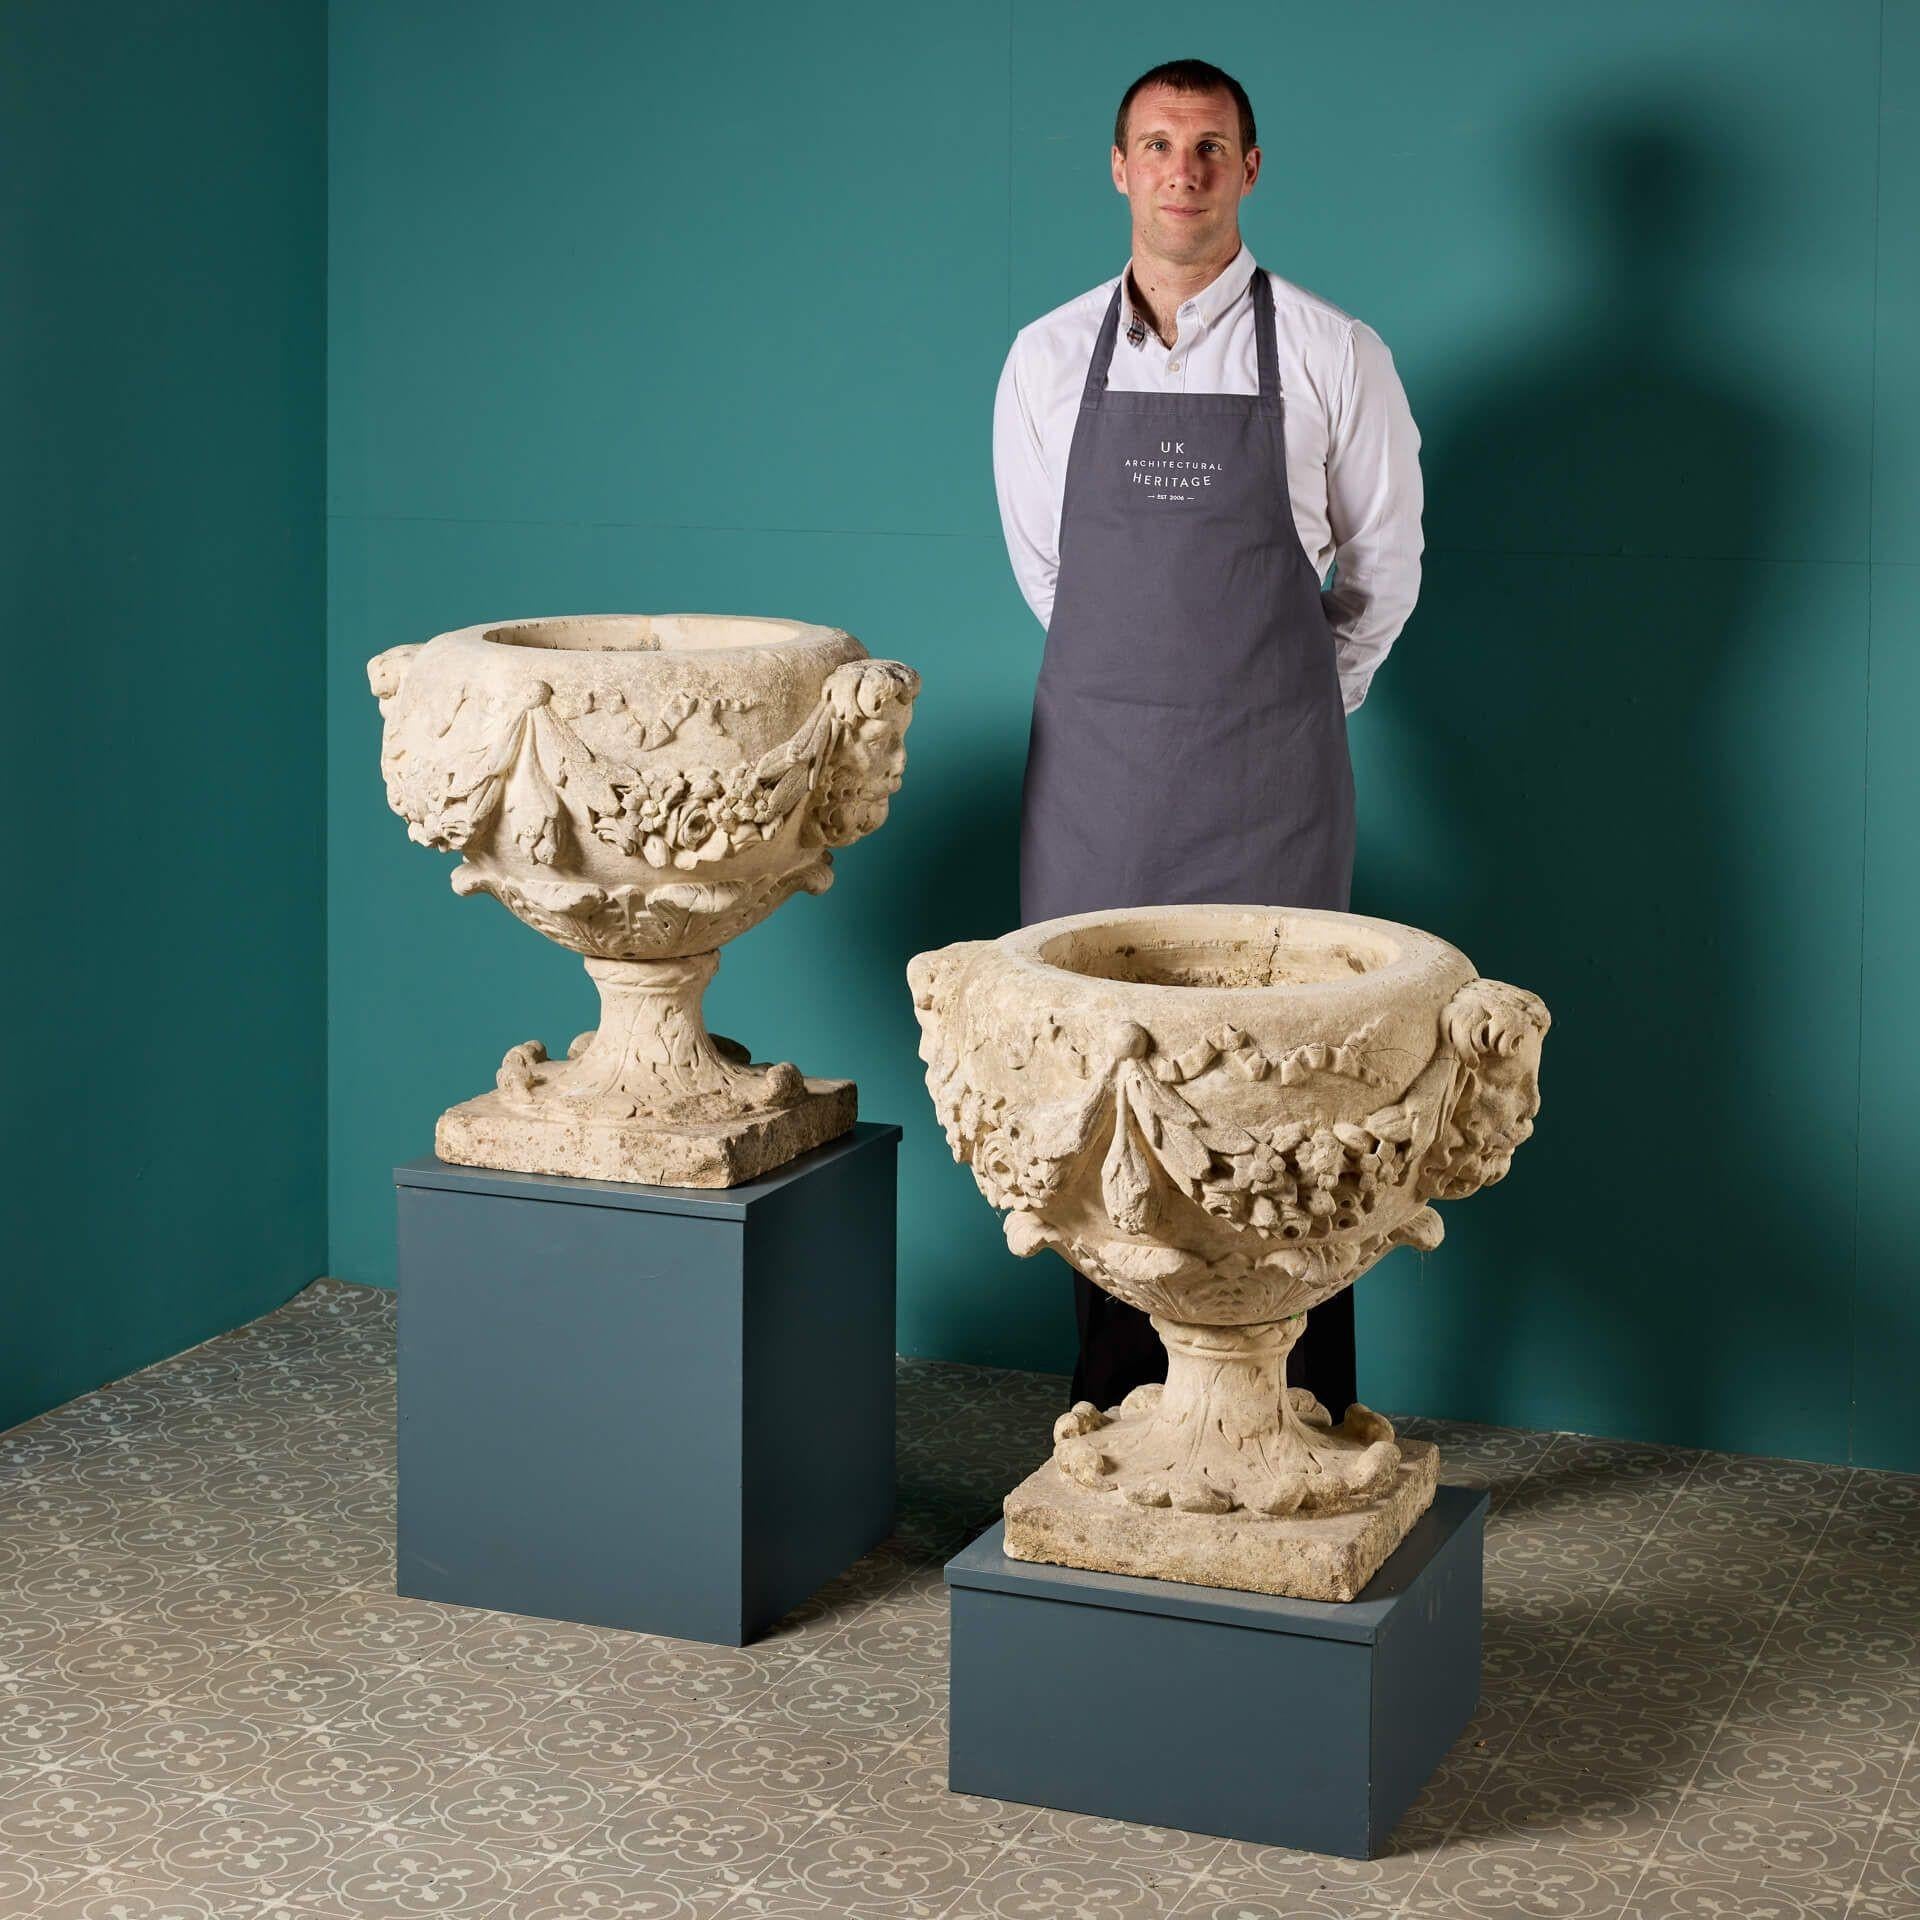 A pair of 240-year-old late 18th century English carved limestone garden urns from Aske Hall, North Yorkshire UK dispersed as part of a three day auction sale in 1994. Aske Hall is an English Georgian country house that originates from as early as